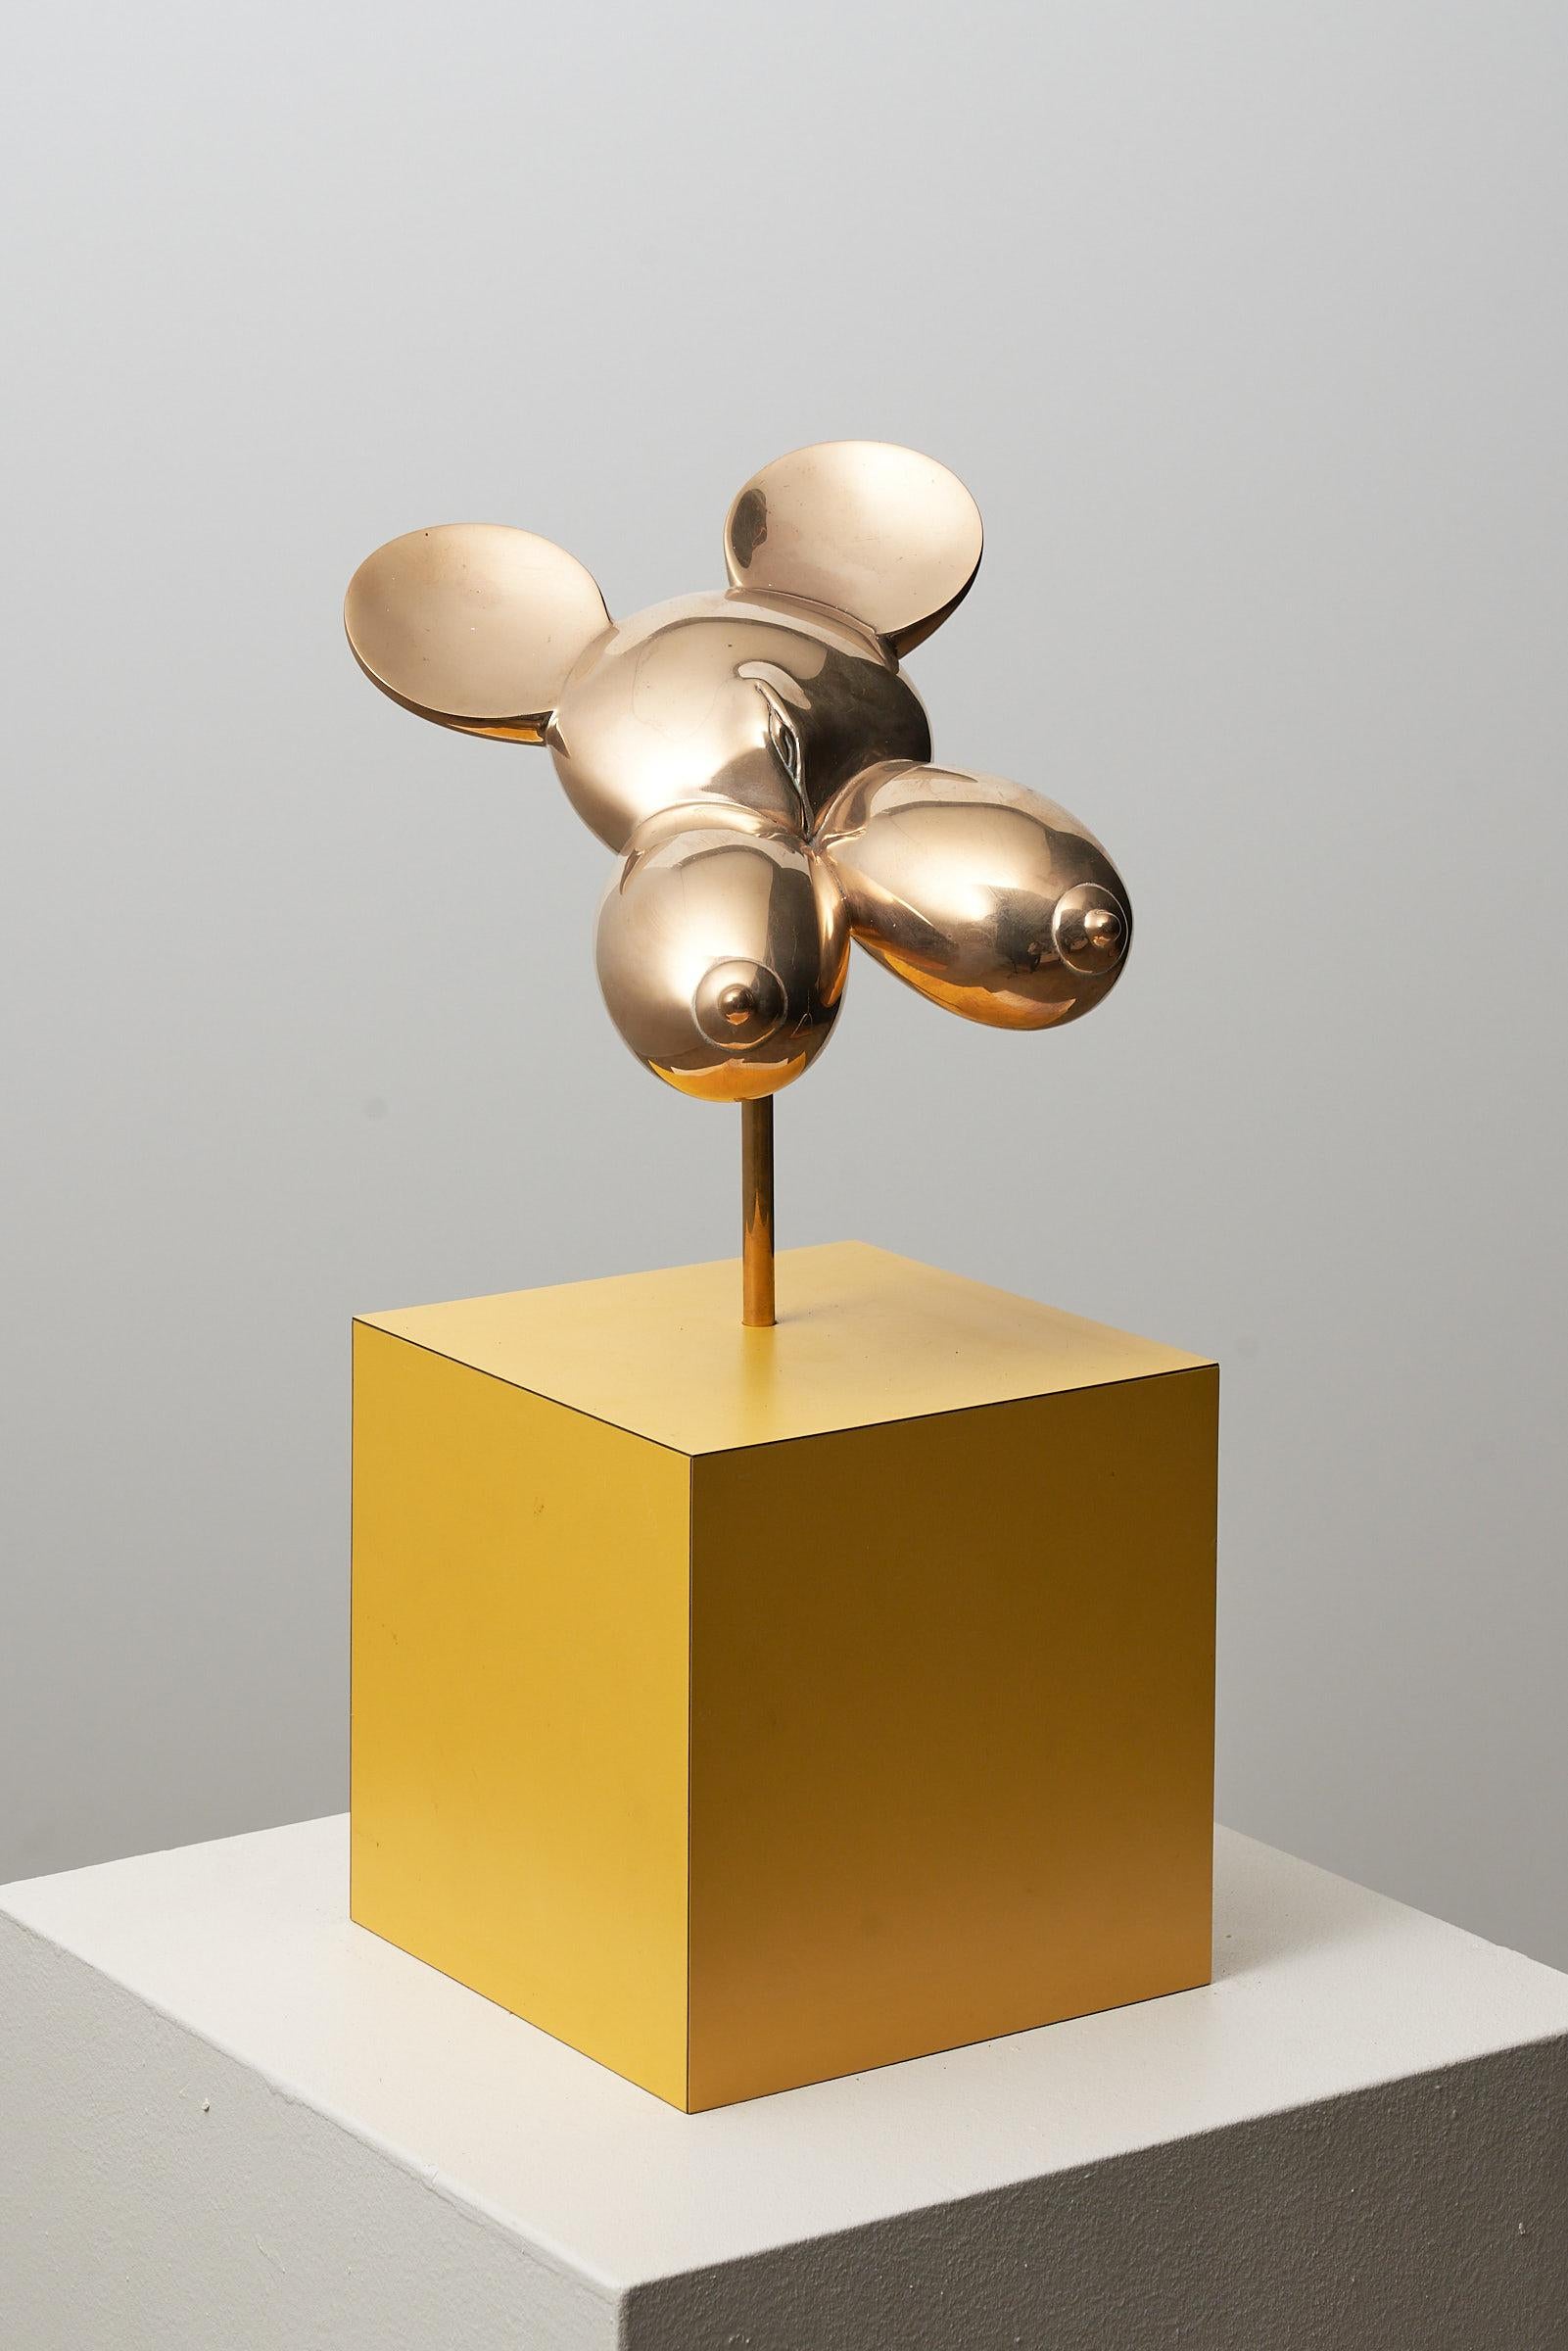 Behold the exquisite bronze sculpture 'MIMA' by Belgian artist Eduard Van Giel. This stunning piece is more than just a decorative item – it's a work of art that comes with a certificate personally signed by the artist. 'MIMA' is a unique creation